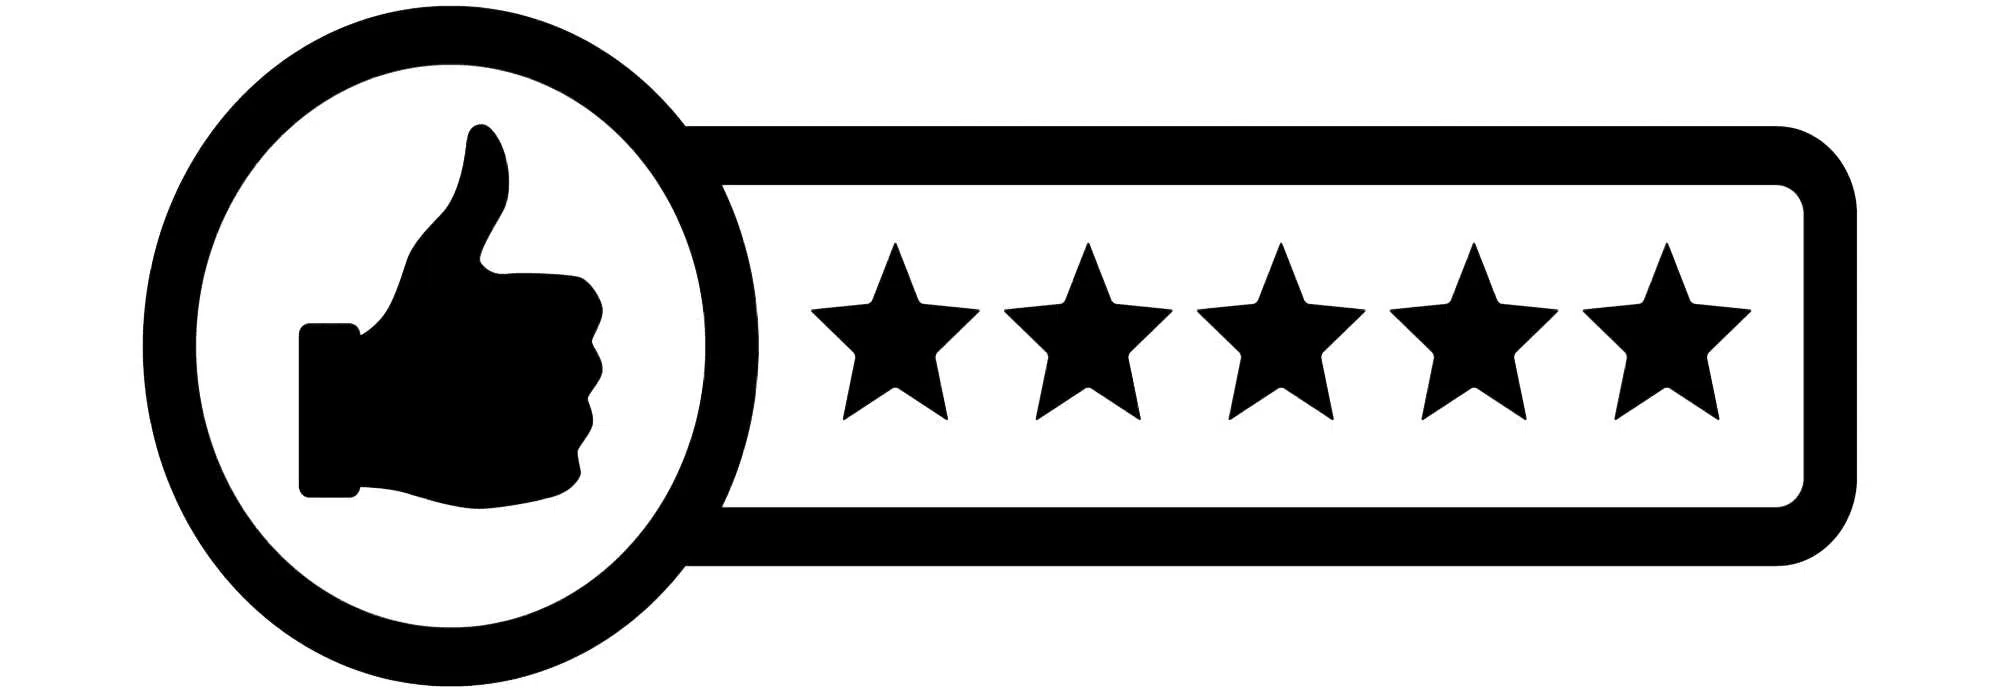 Thumbs up icon with 5-stars as a customer review